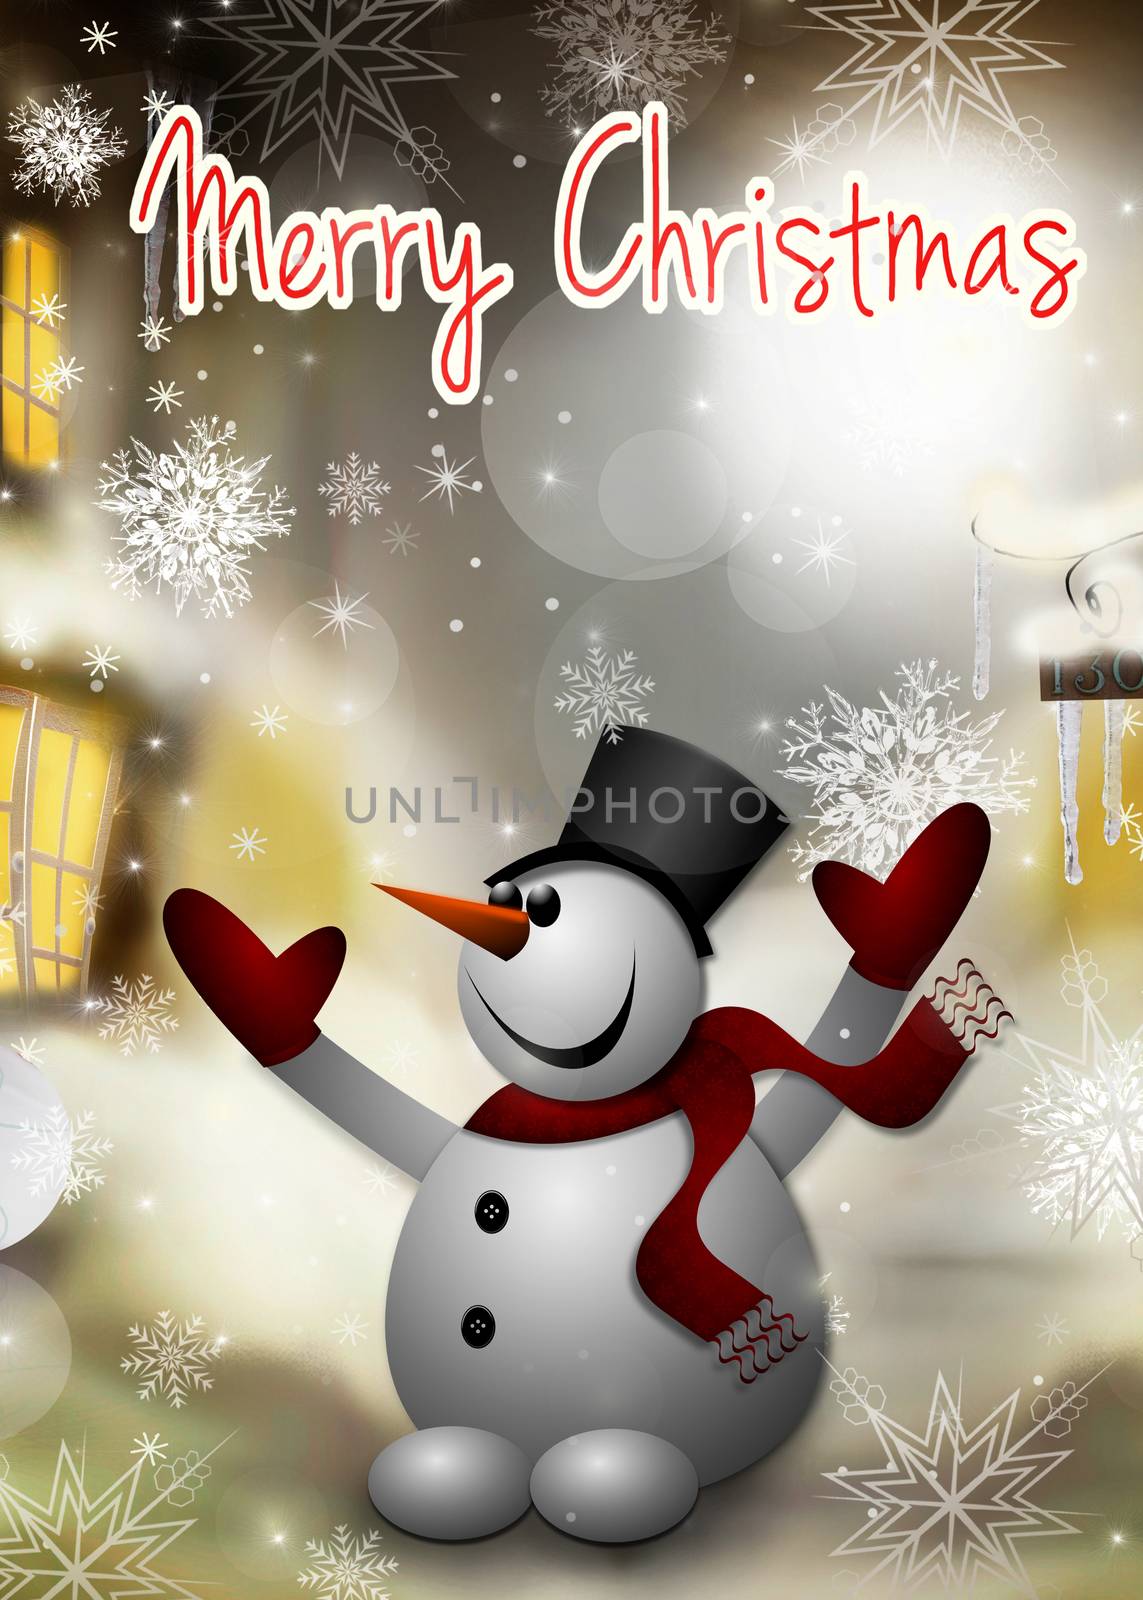 A beautiful Christmas card with a cheerful snowman on a festive winter street and a greeting inscription